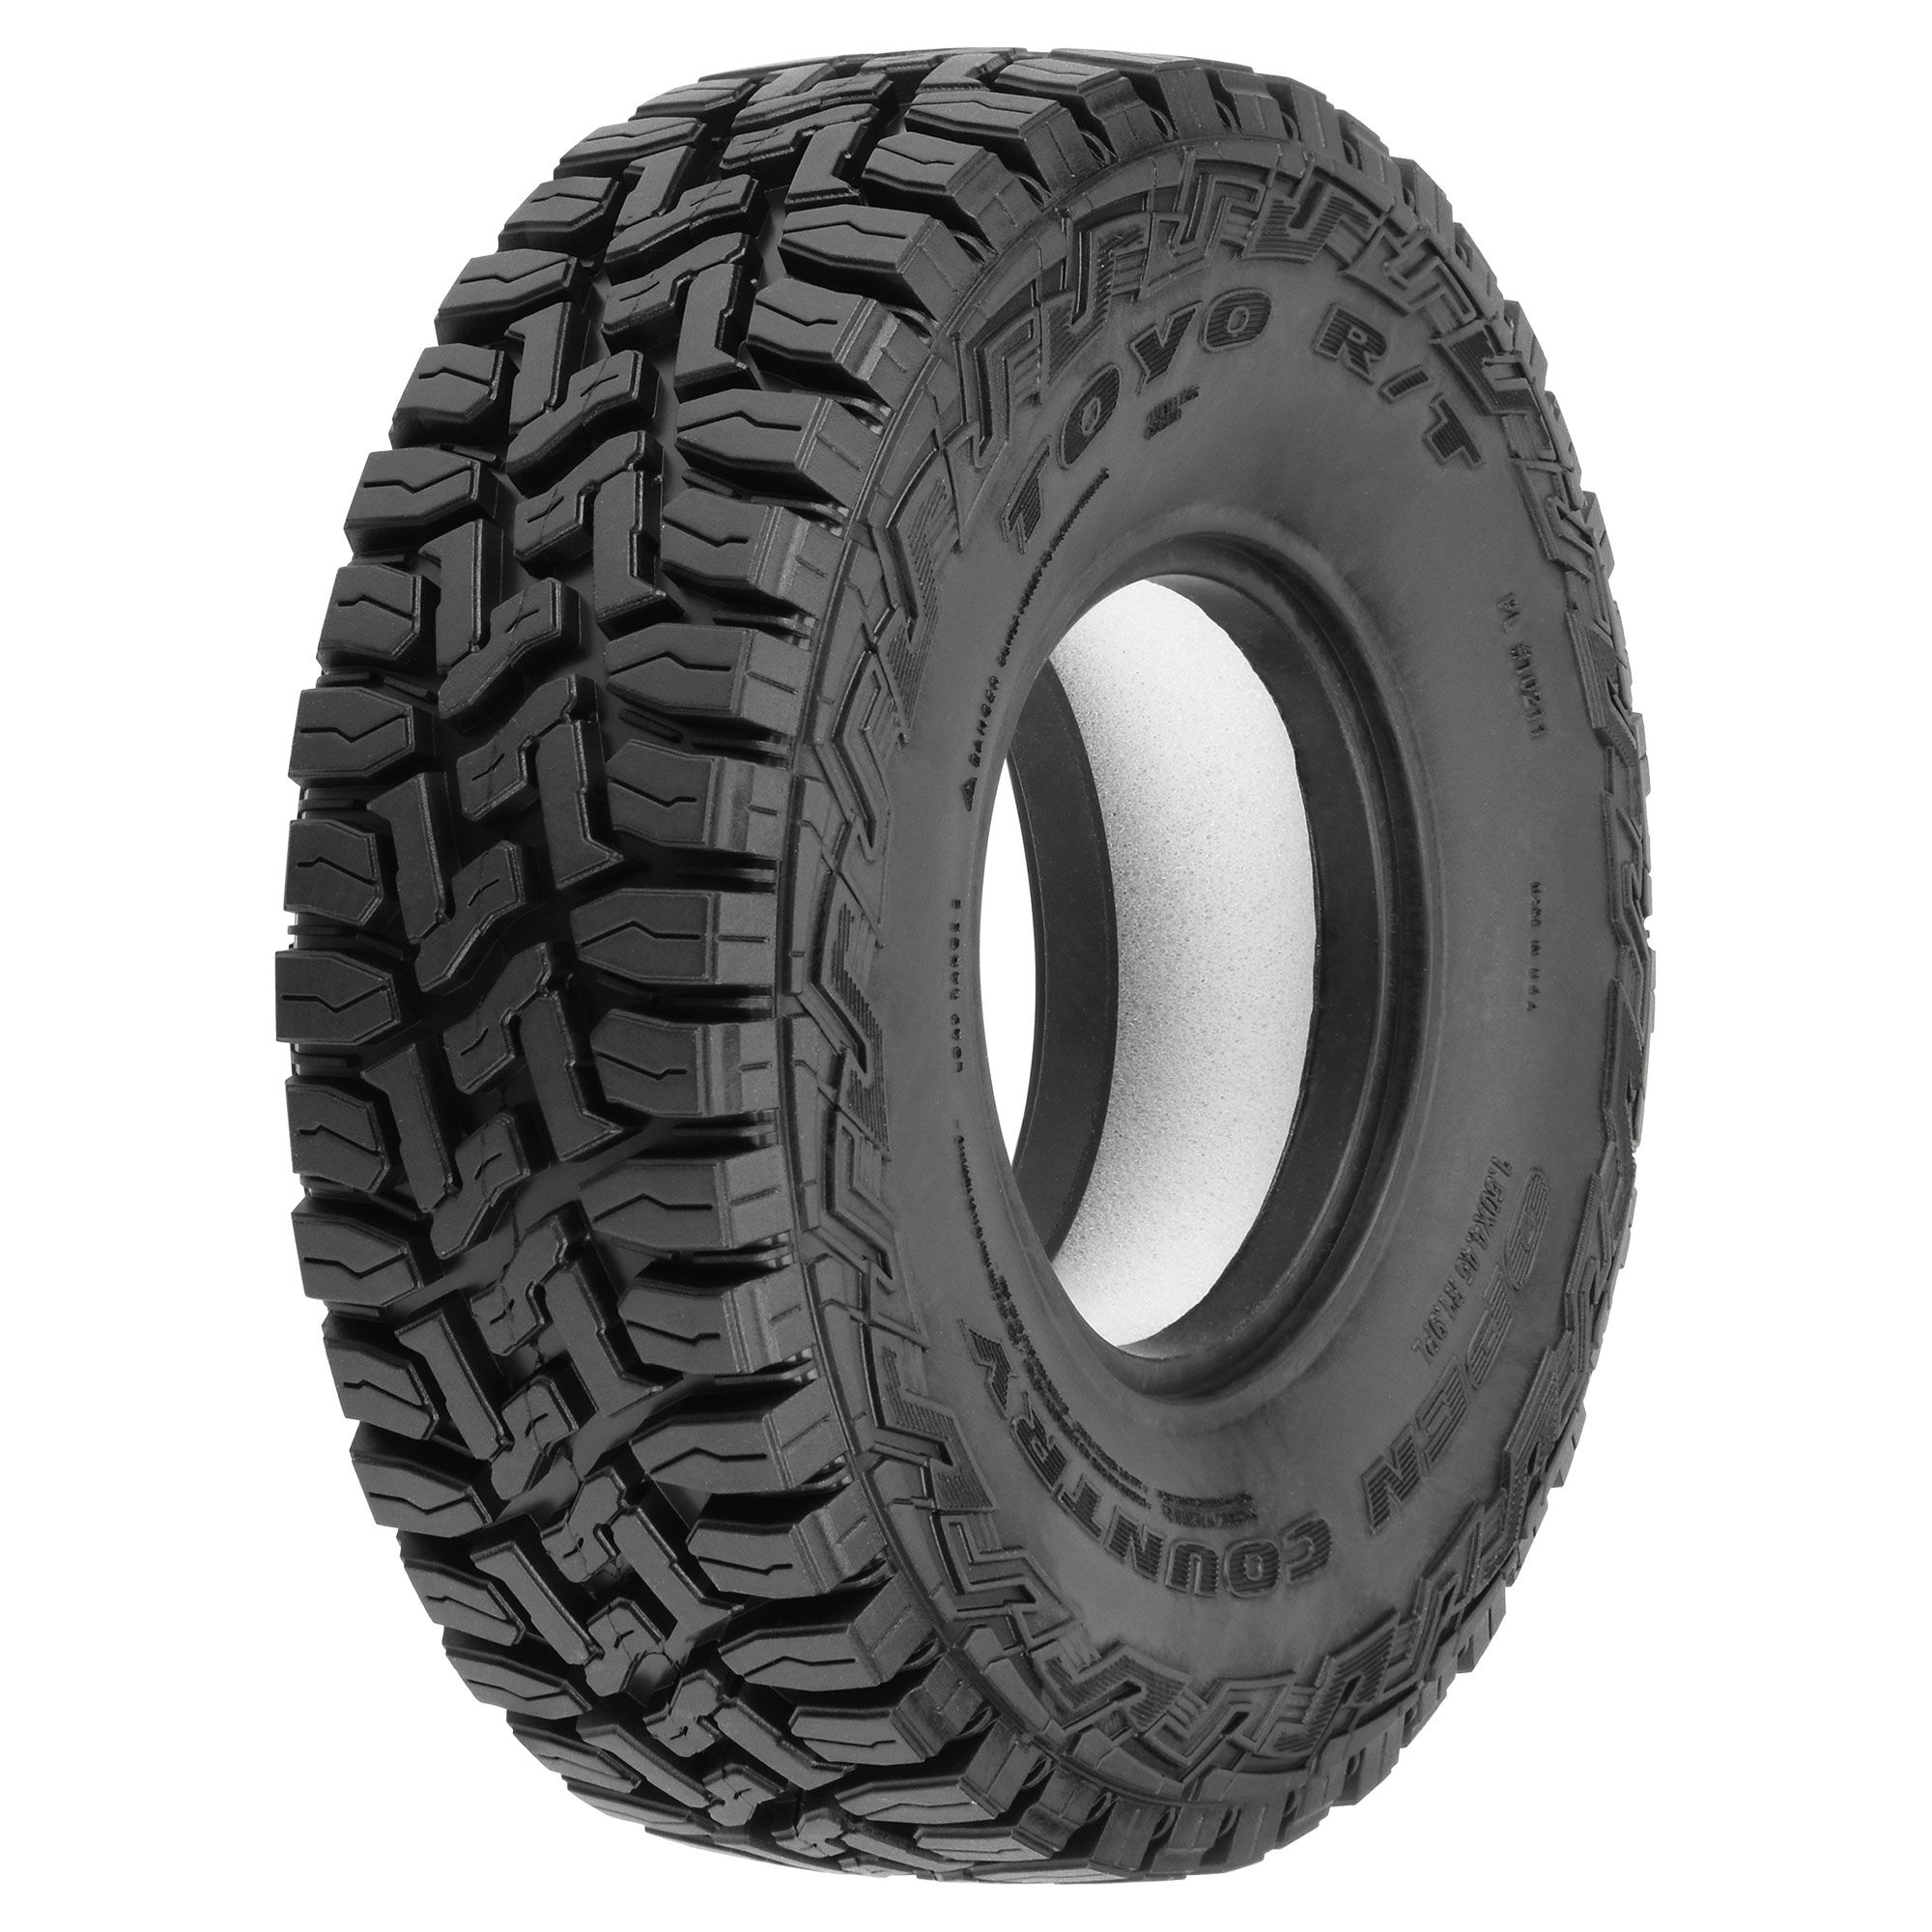 TOYO TIRES - M/T Open Country – Muscle Tire Lettering